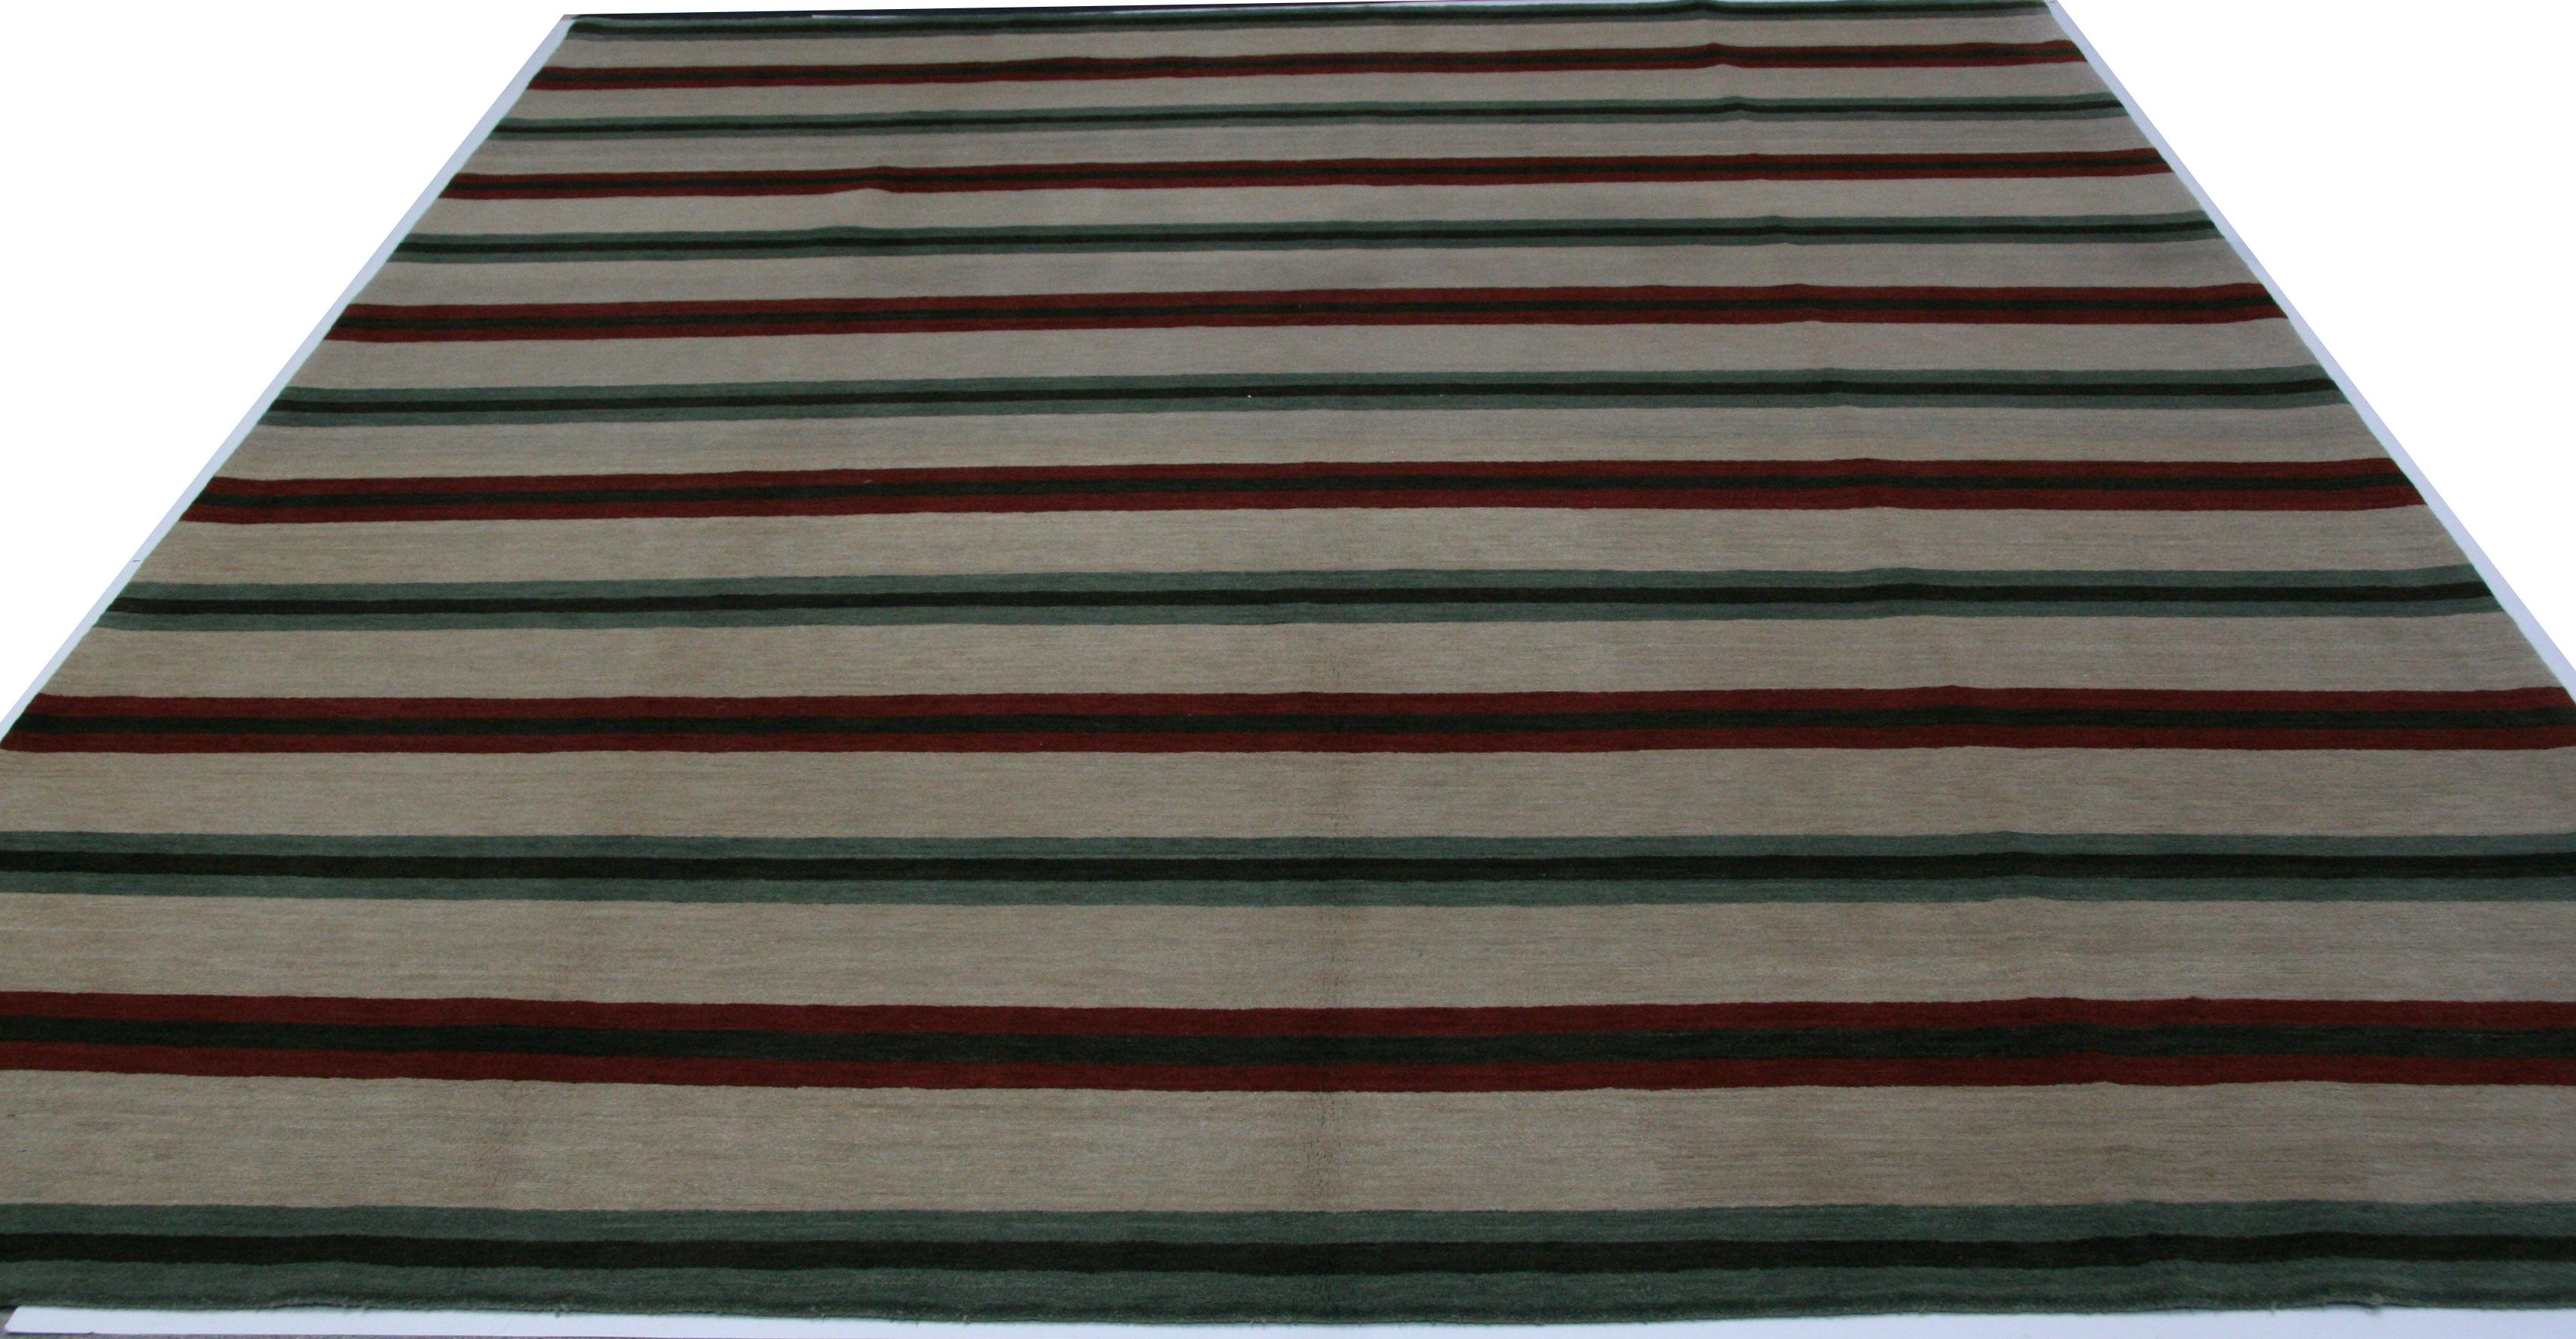 Simple stripes in red, teal, black and beige add up to a charming rug for the contemporary home or office. Hand knotted in Nepal using wool dyed with natural vegetal dyes.